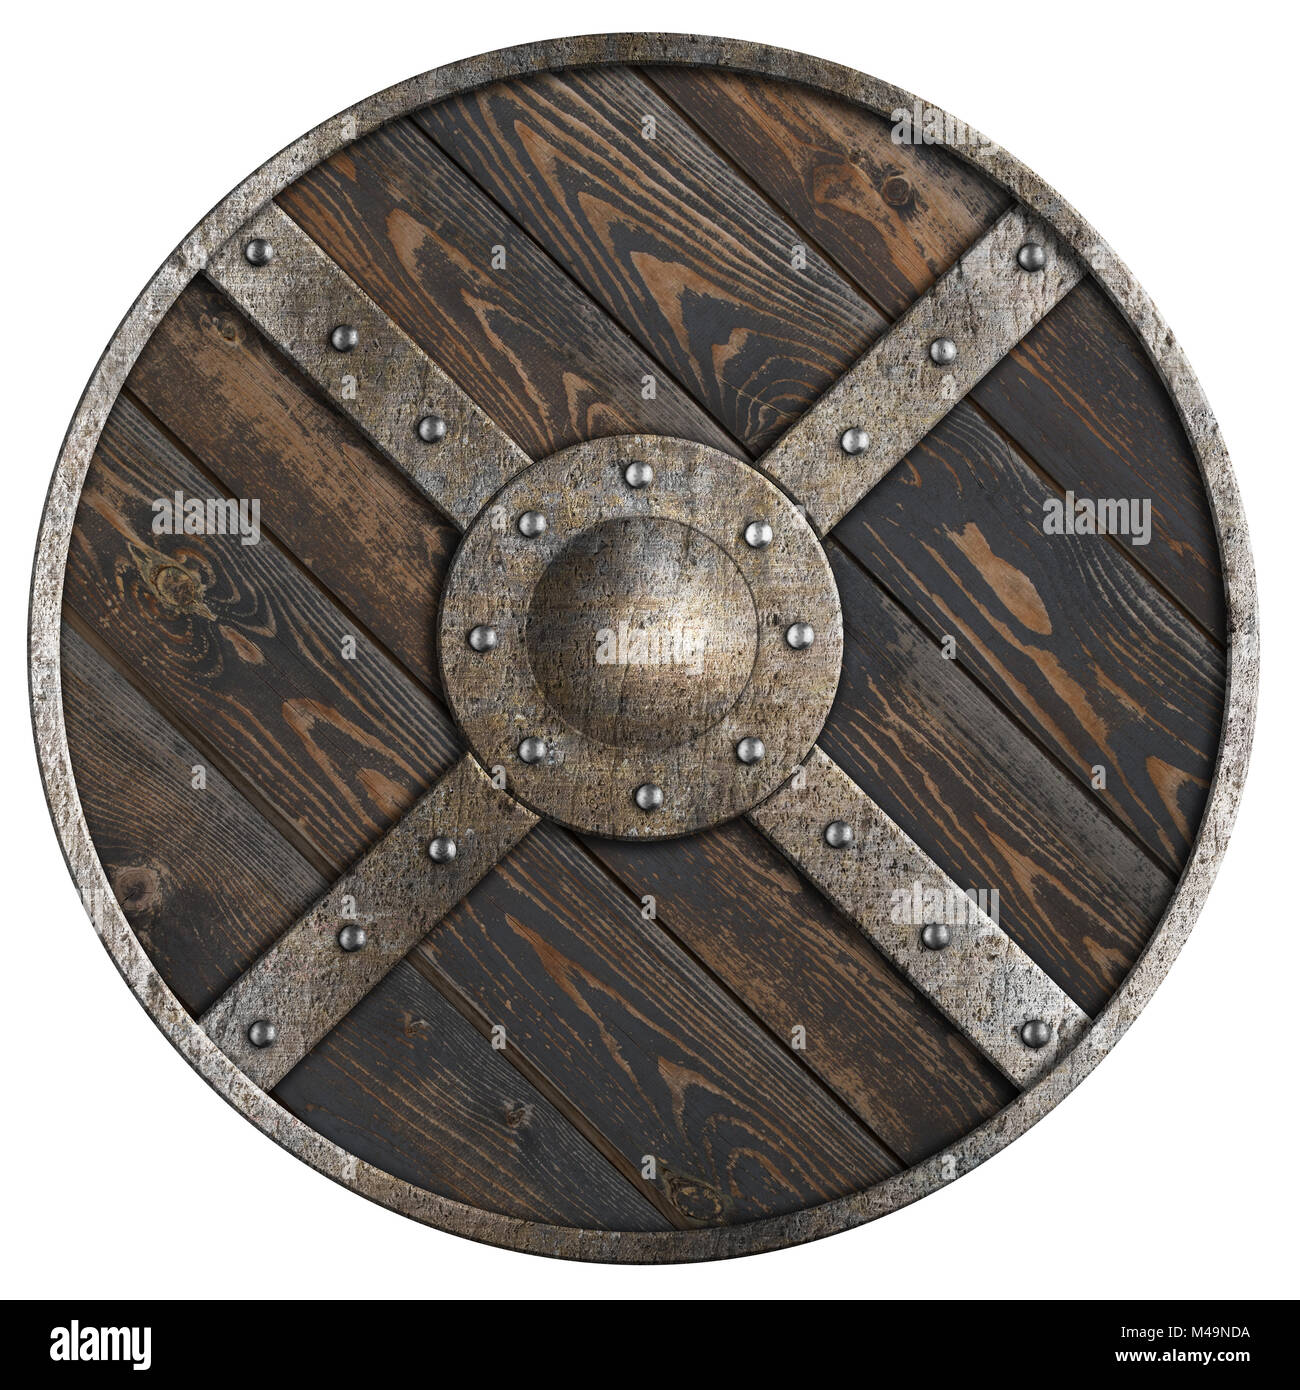 Wooden medieval round shield with metal frame and cross isolated 3d illustration Stock Photo